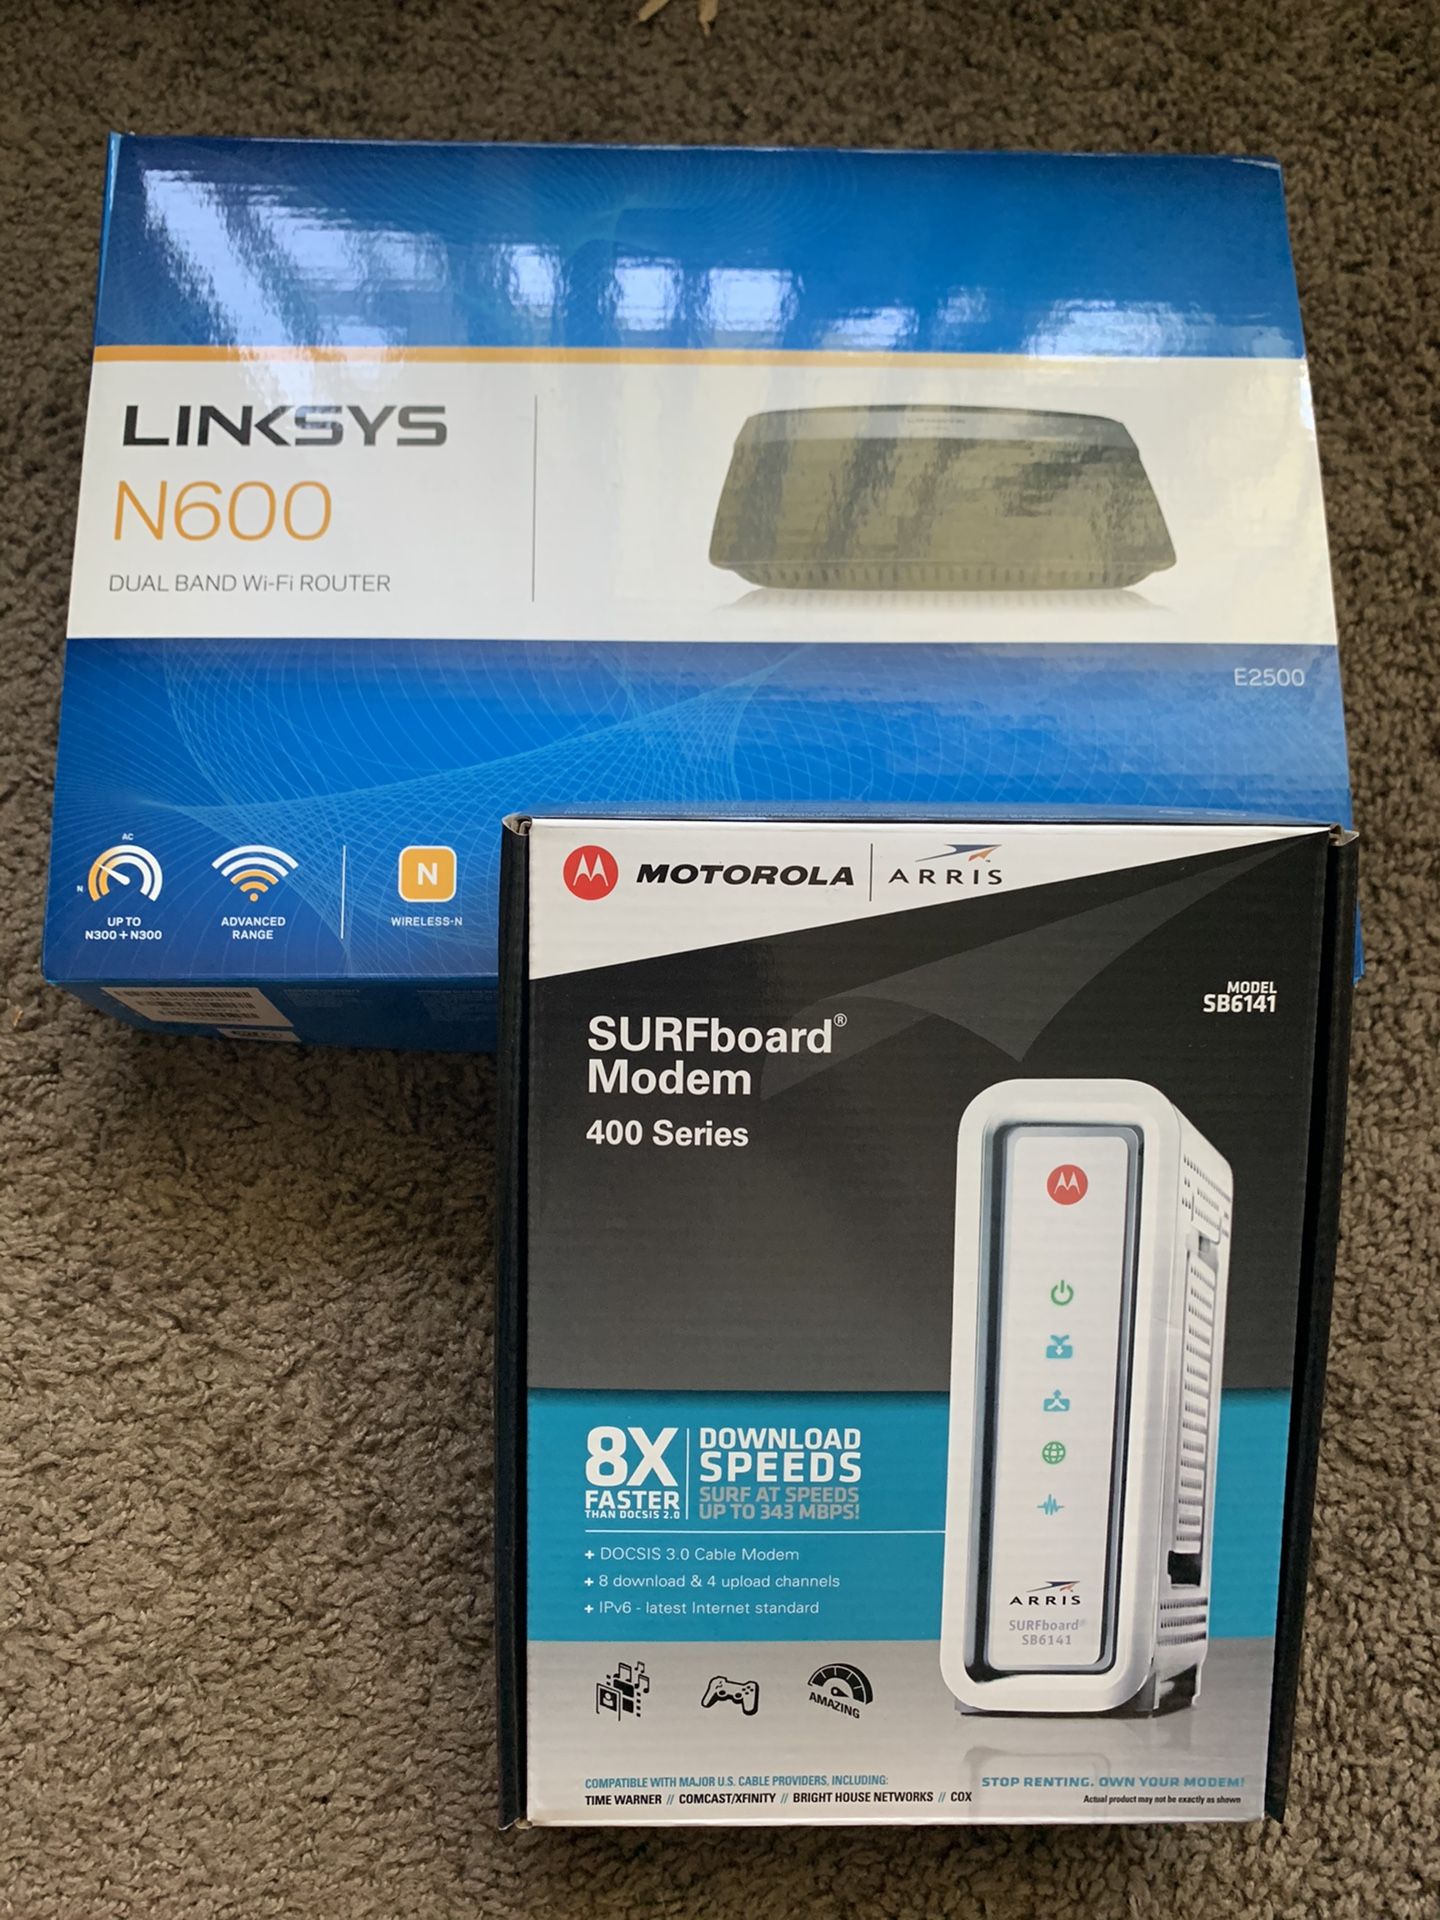 WiFi router and modem with boxes